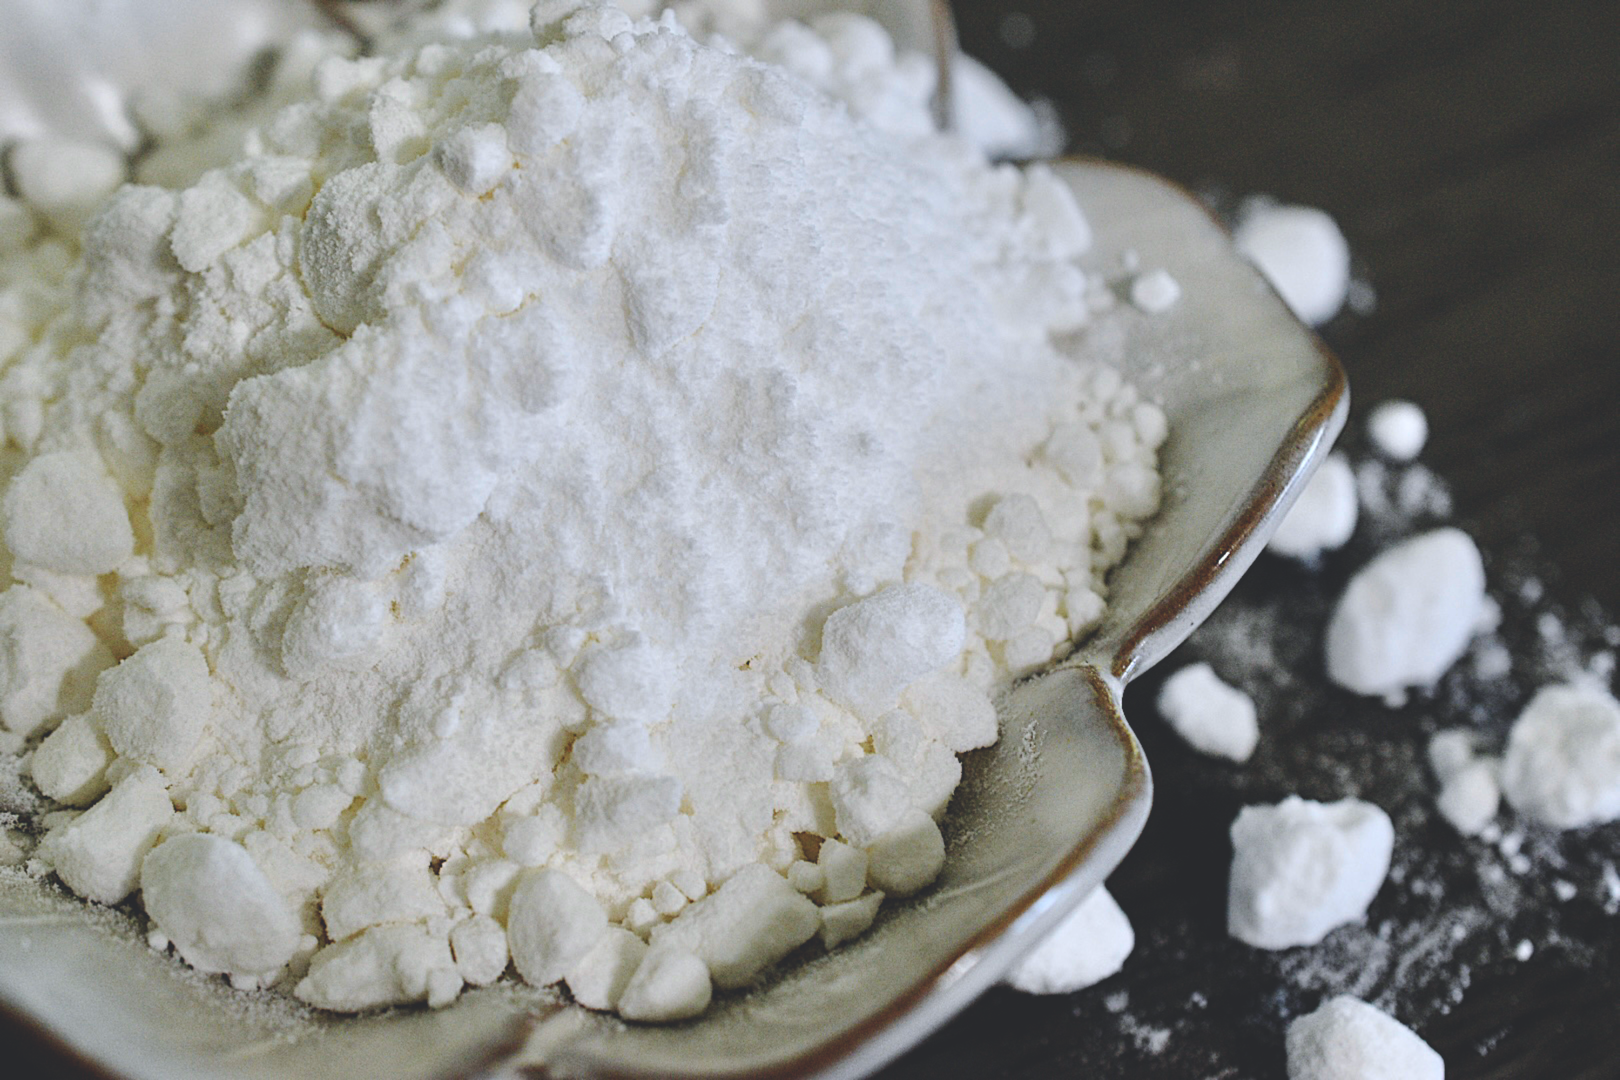 The white and silky coconut milk powder rests in a white, flower shaped dish on a wooden surface. Small clumps of powder are in the background of the photo.